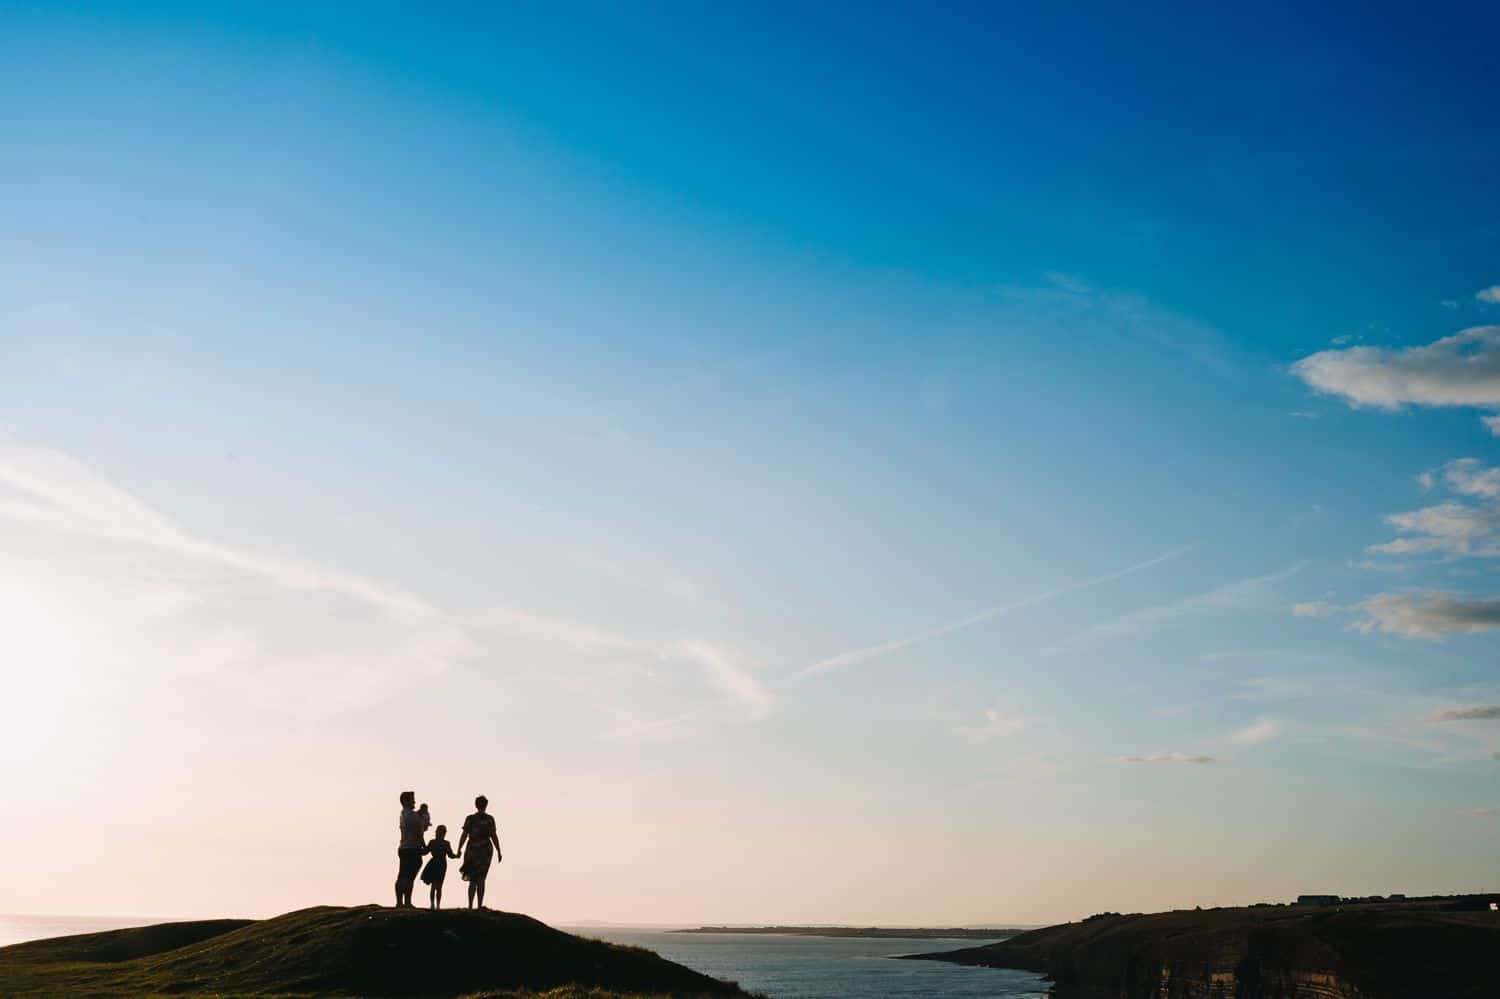 Silhouette of a family standing on a hill overlooking the ocean.